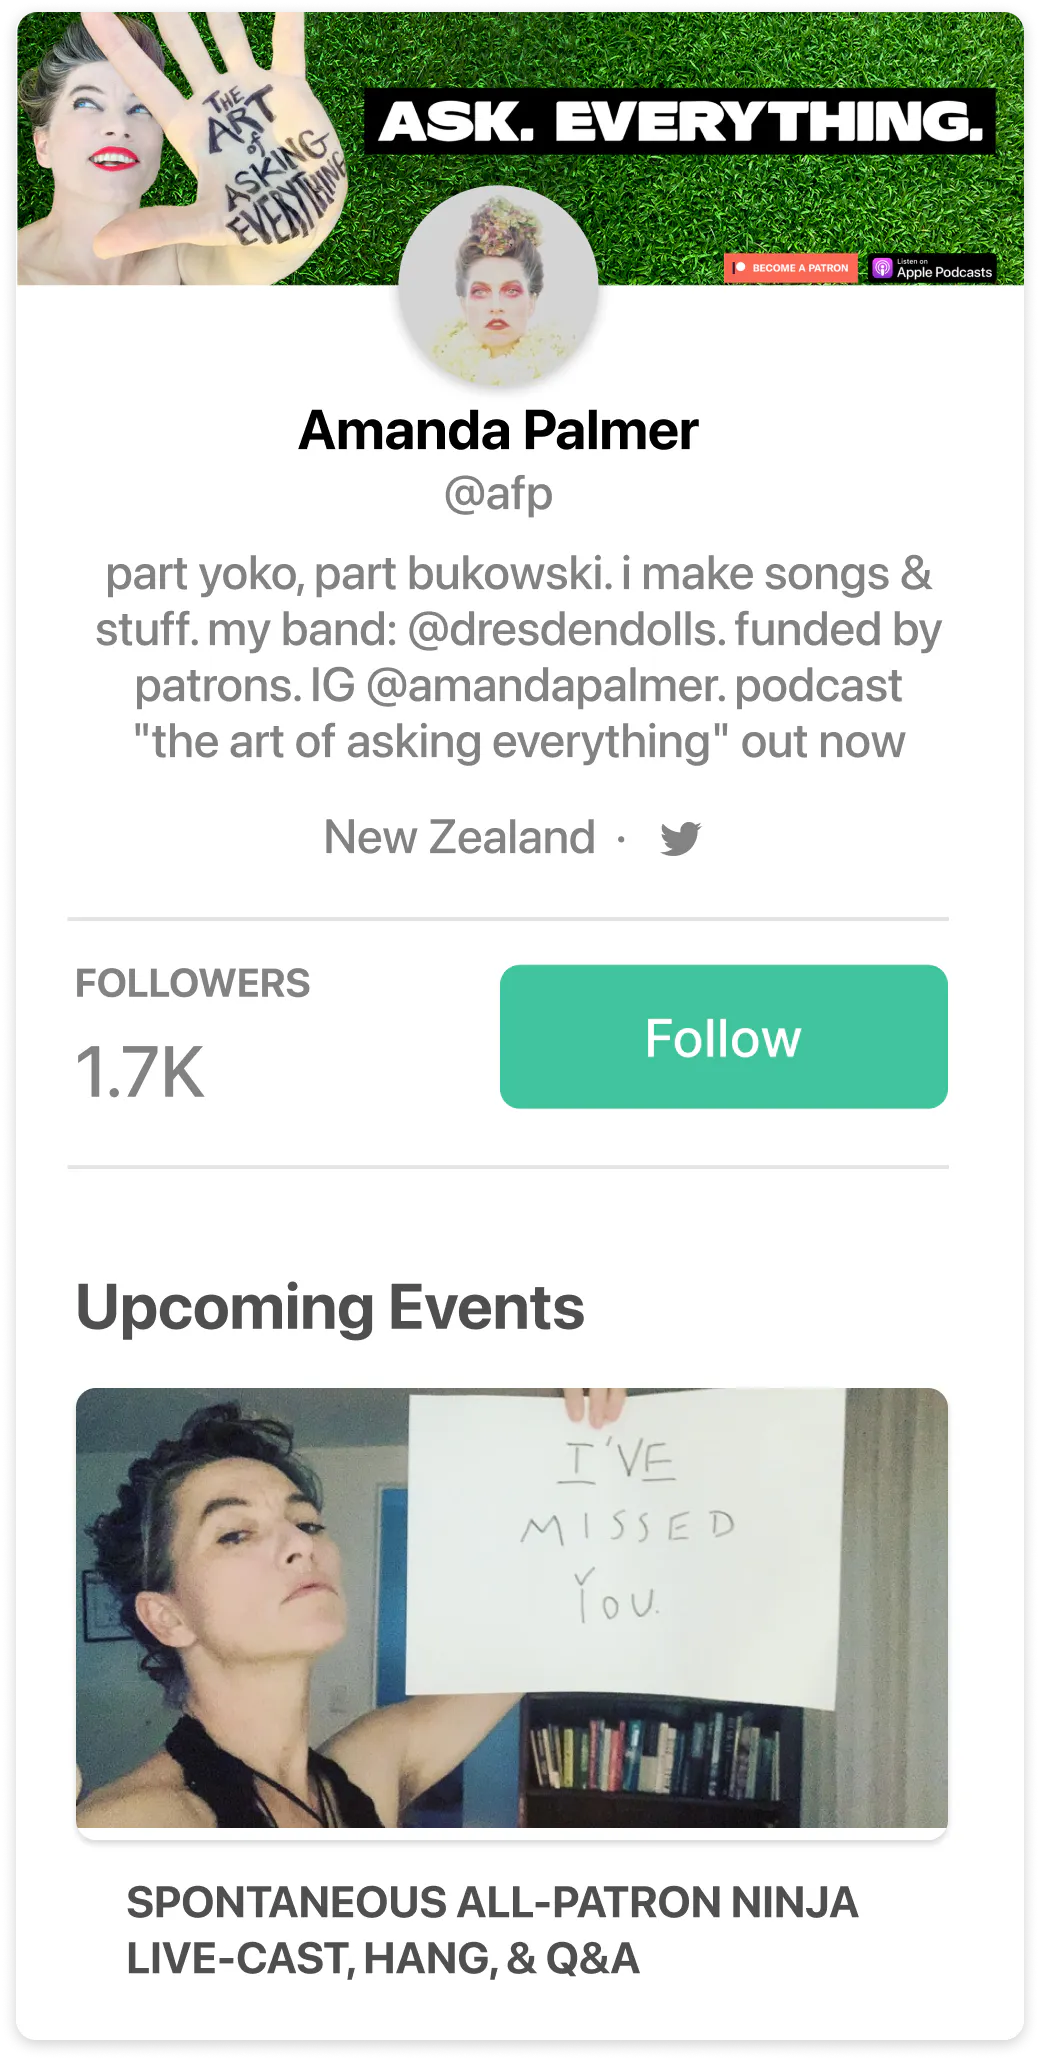 Amanda Palmer example channel page